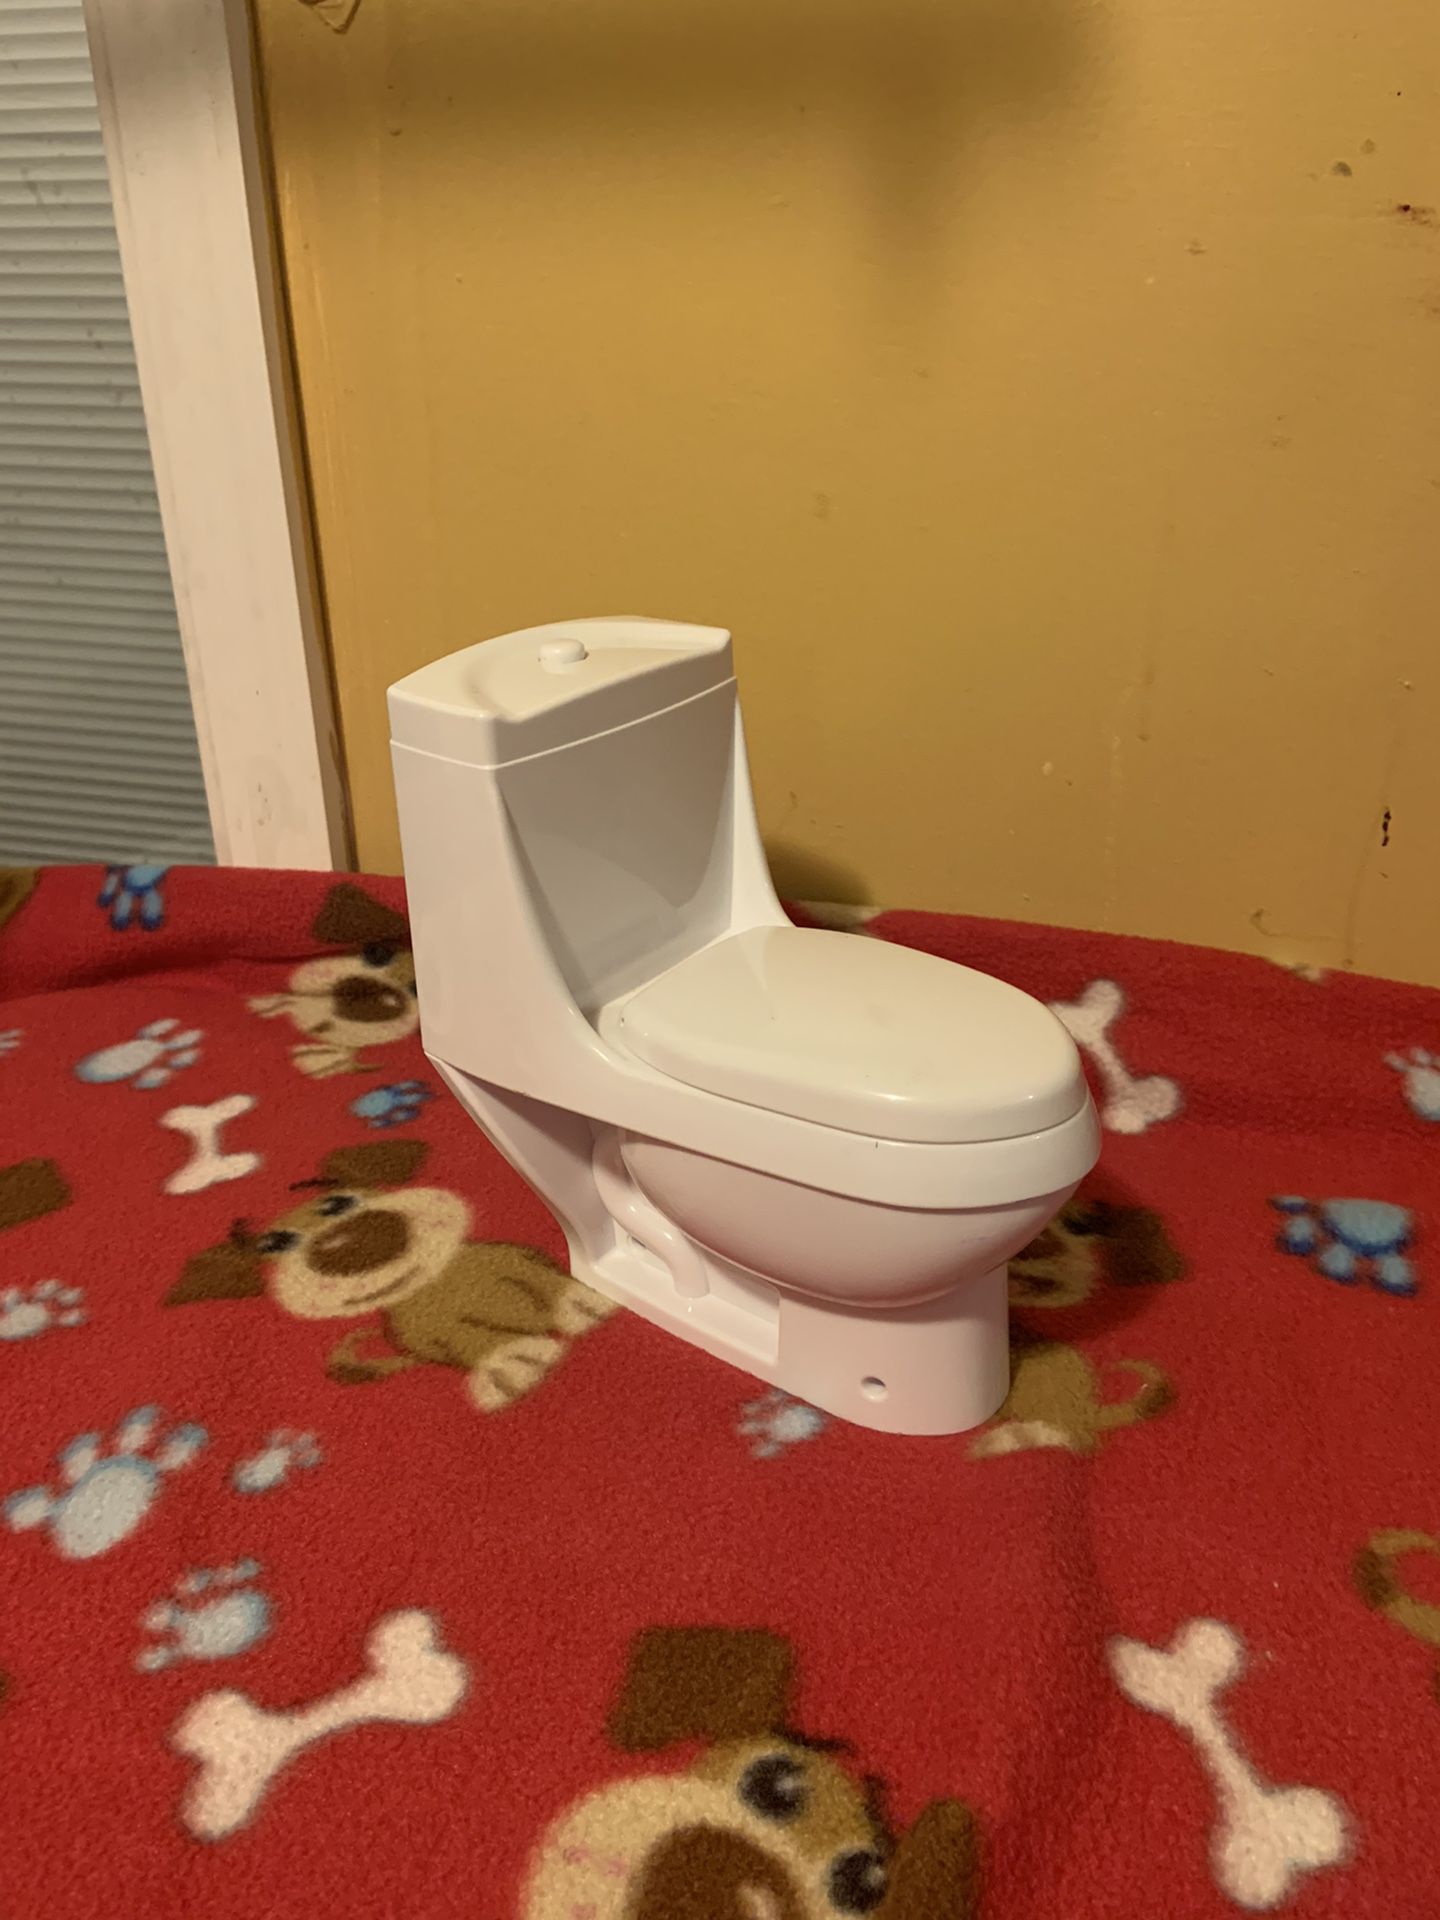 Toilet for an 18” doll